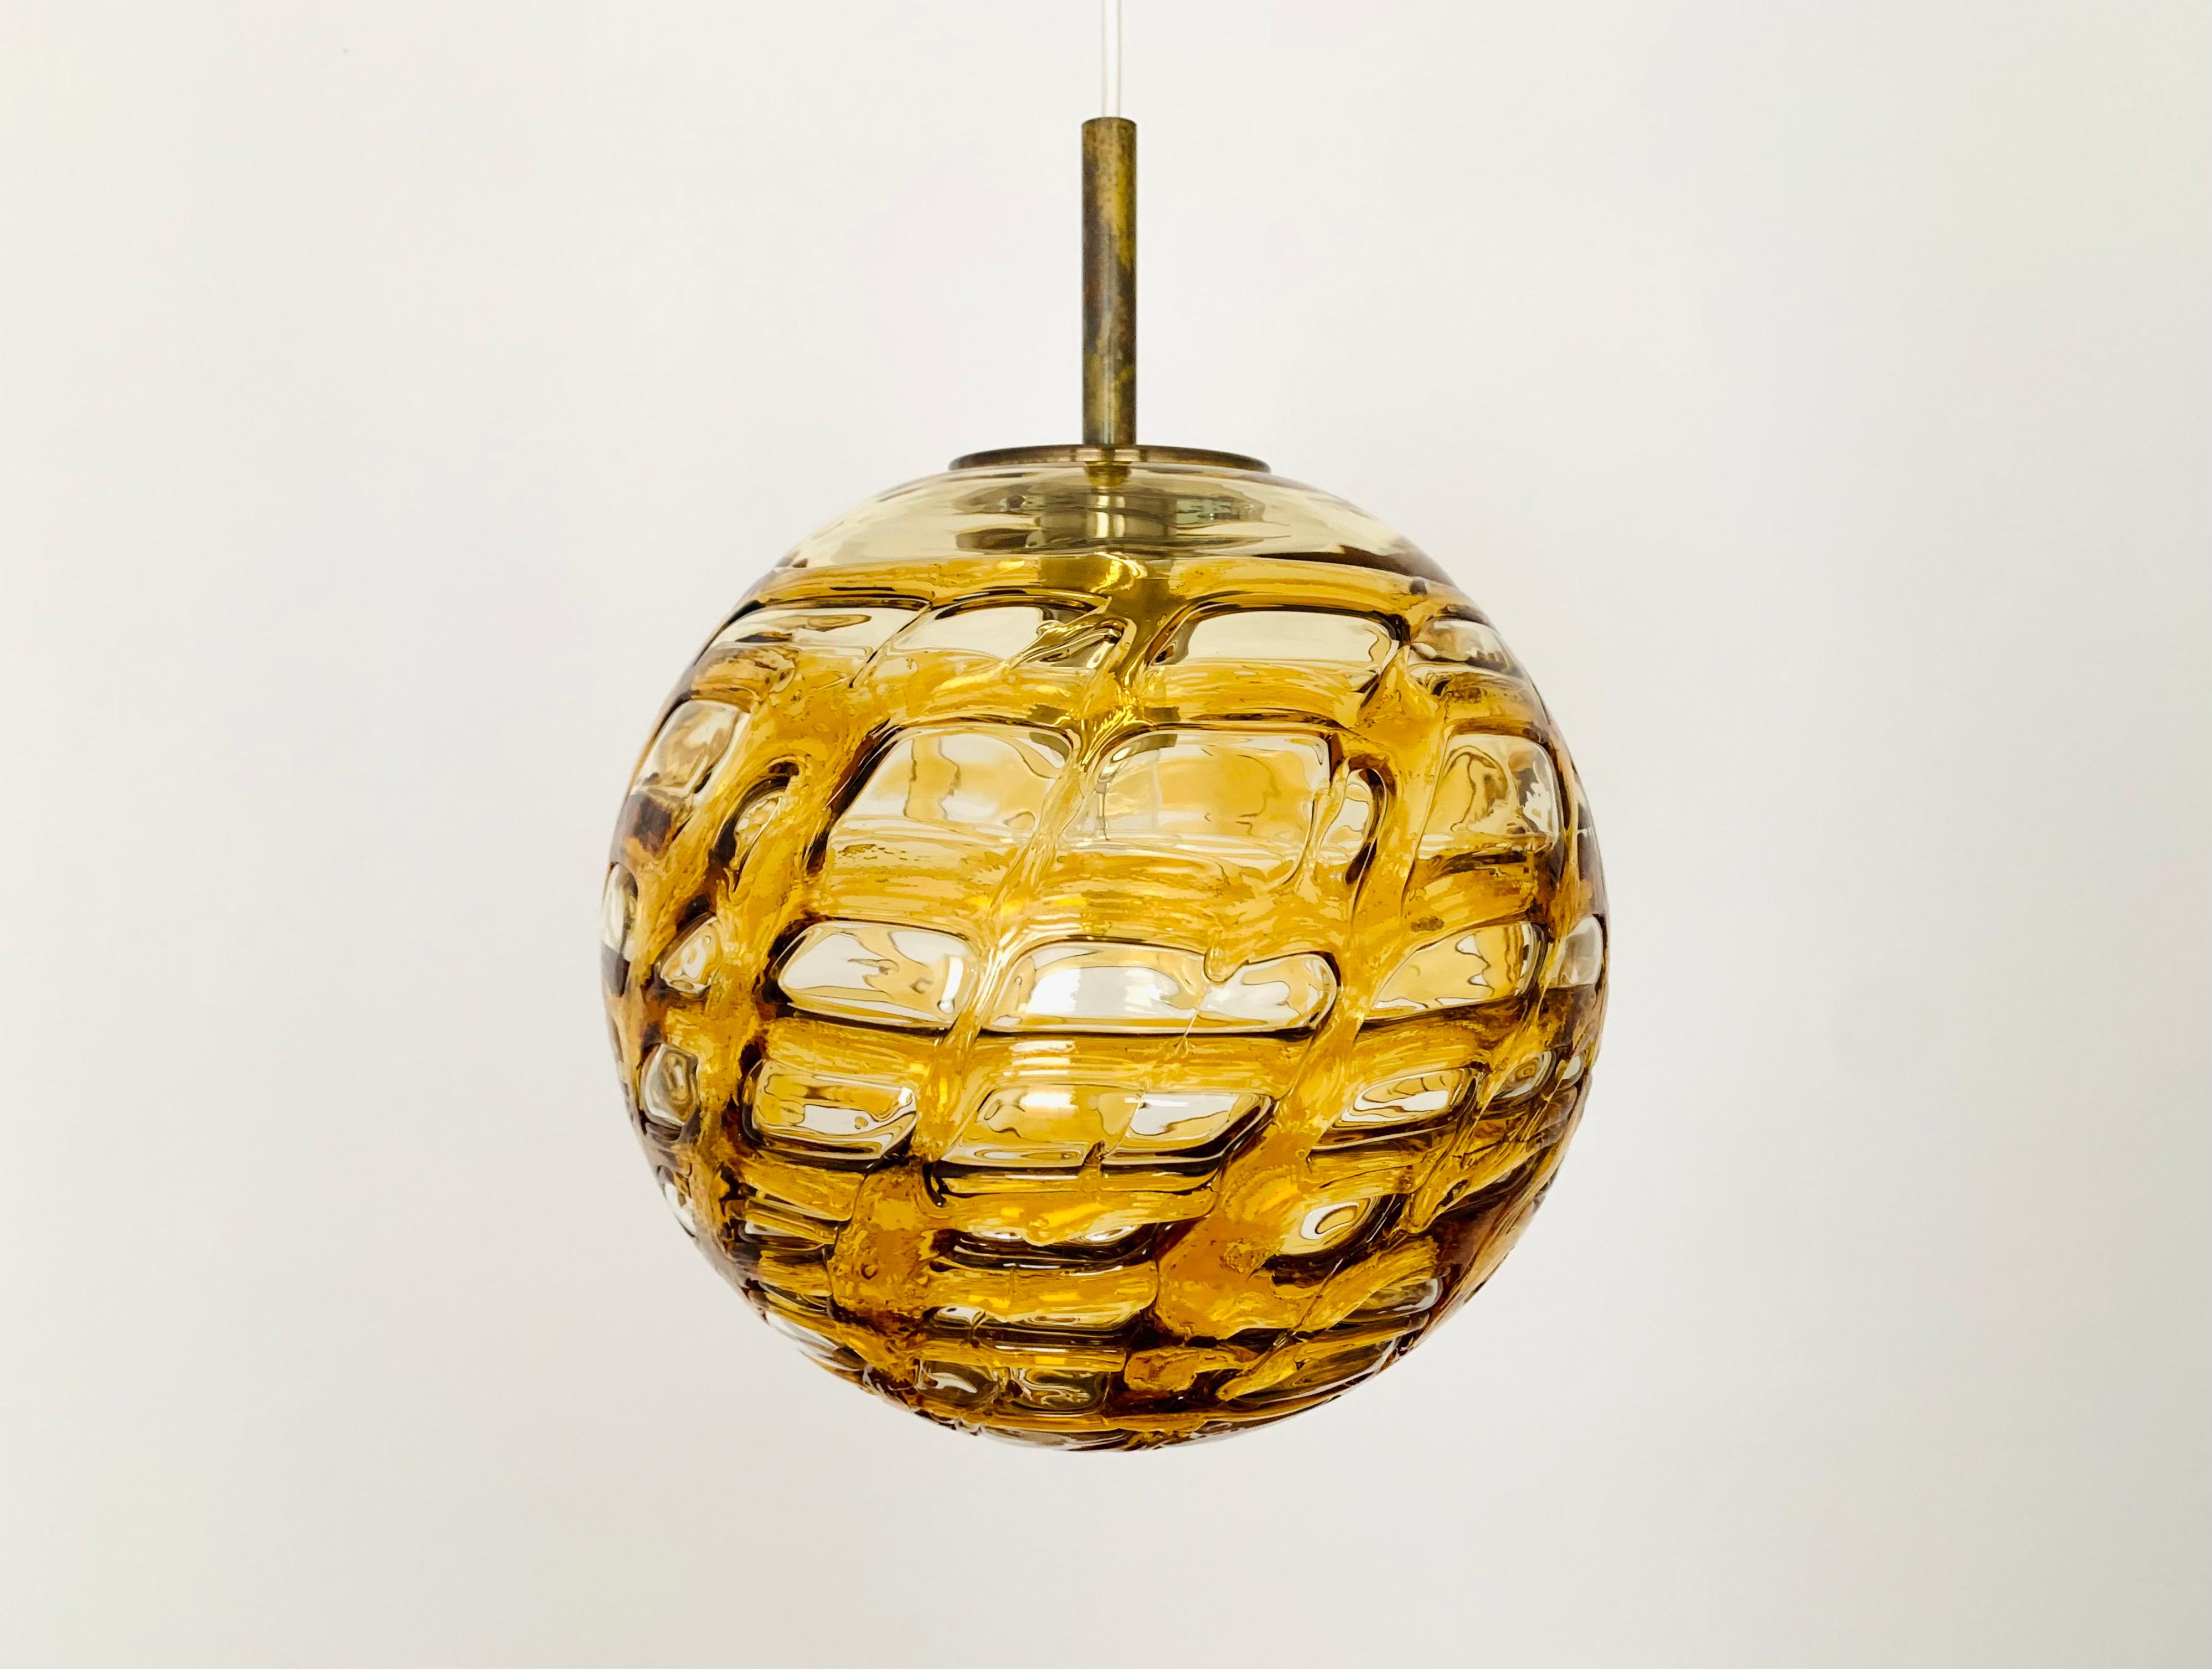 Very nice amber lamp by Doria from the 1960s.
Very elegant Hollywood Regency design with a fantastically glamorous look.
The structure in the glass creates a spectacular light.

Manufacturer: Doria

Condition:

Very good vintage condition